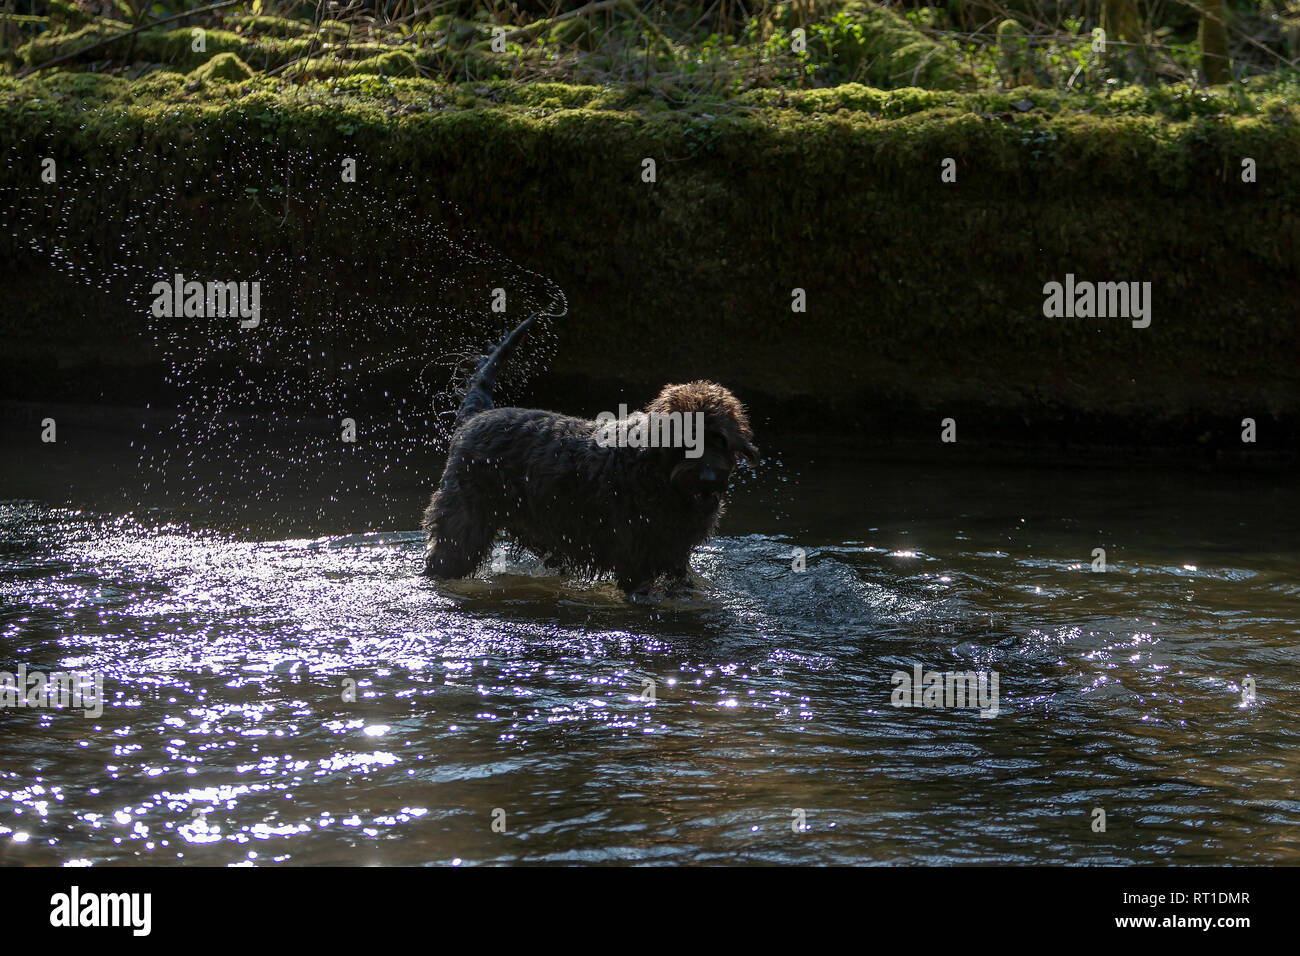 Loggerheads Country Park, Denbighshire, North Wales, UK 27 February 2019 - Weather - pets - The sun continues to shine and this dog took to playing in the River Alyn to keep warm at Loggerheads Country Park, Denbighshire, North Wales, UK Stock Photo